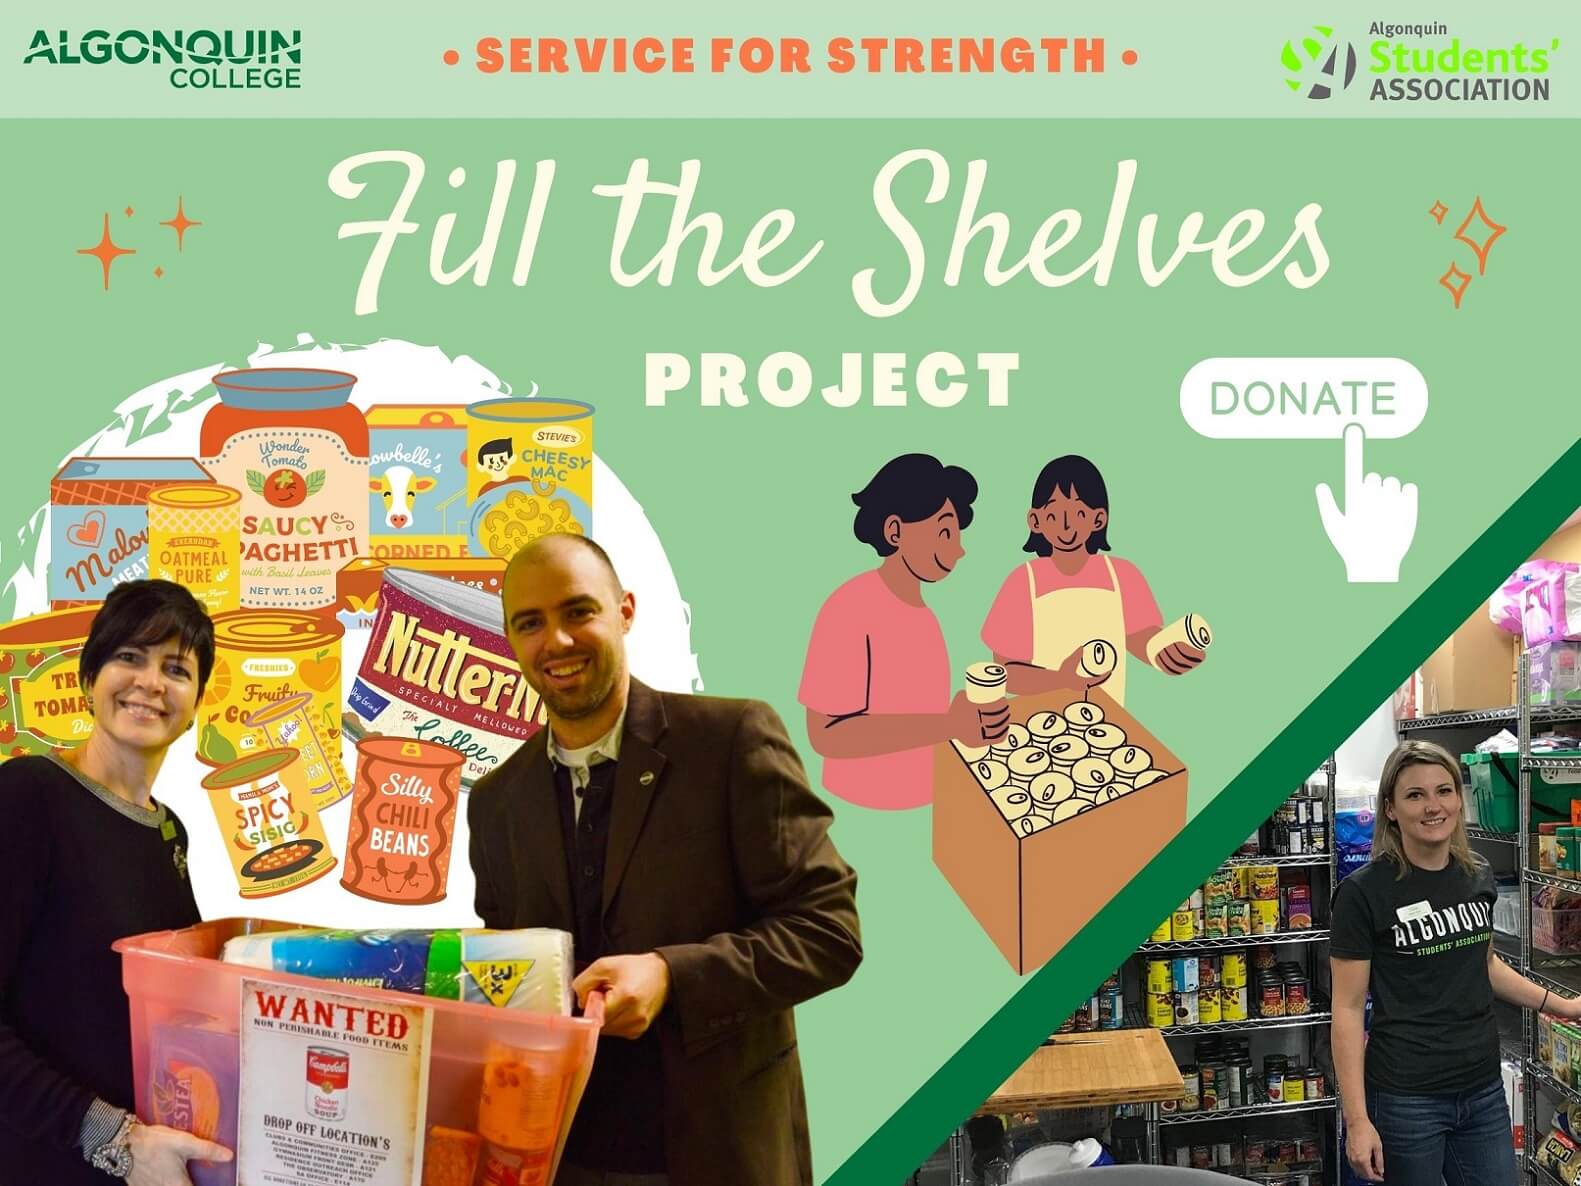 “Fill the Shelves” Project Poster made by Team Service for Strength